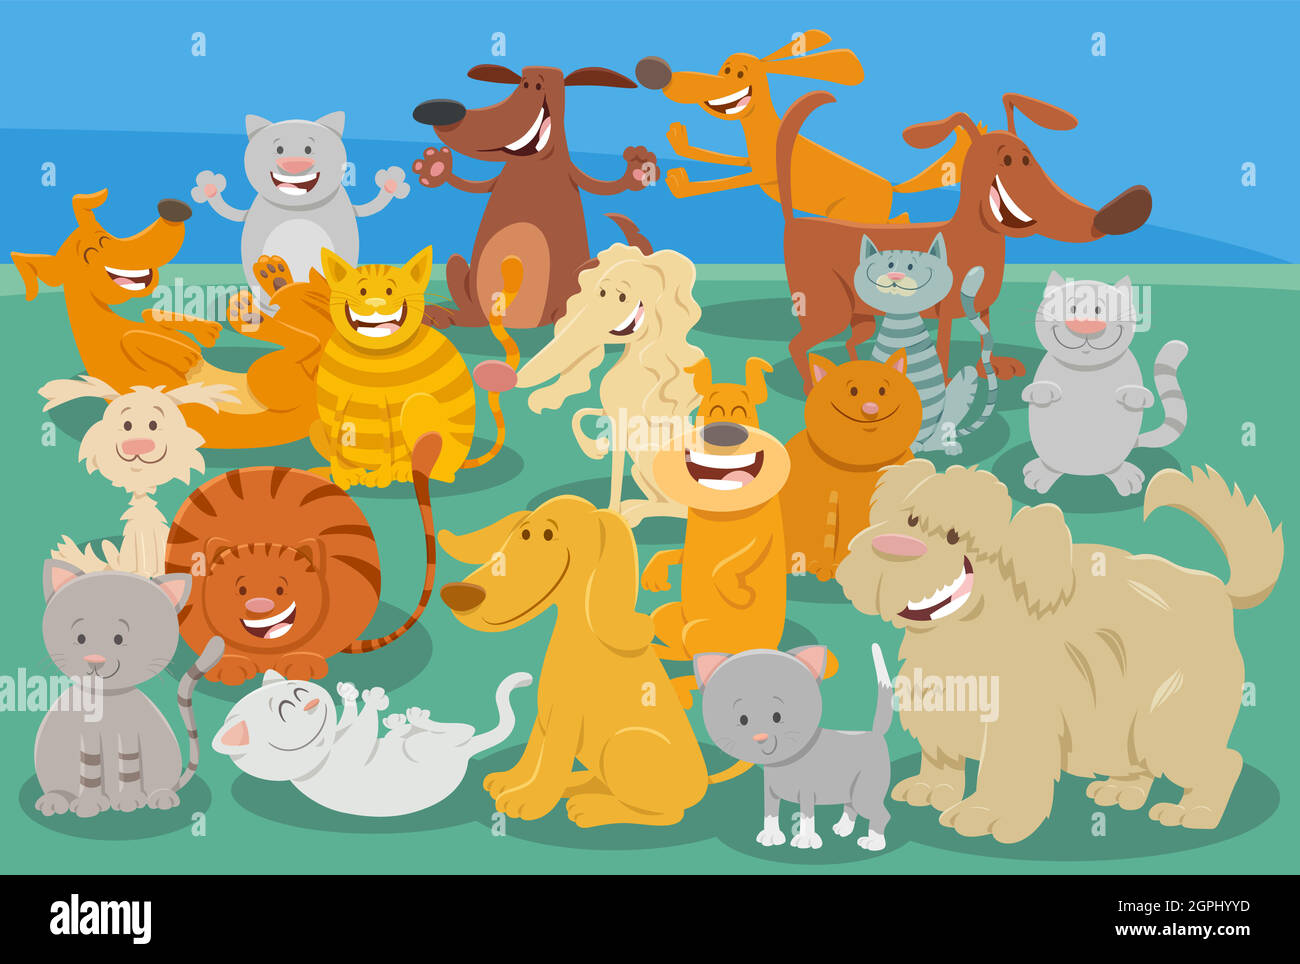 cartoon dogs and cats comic animal characters Stock Vector